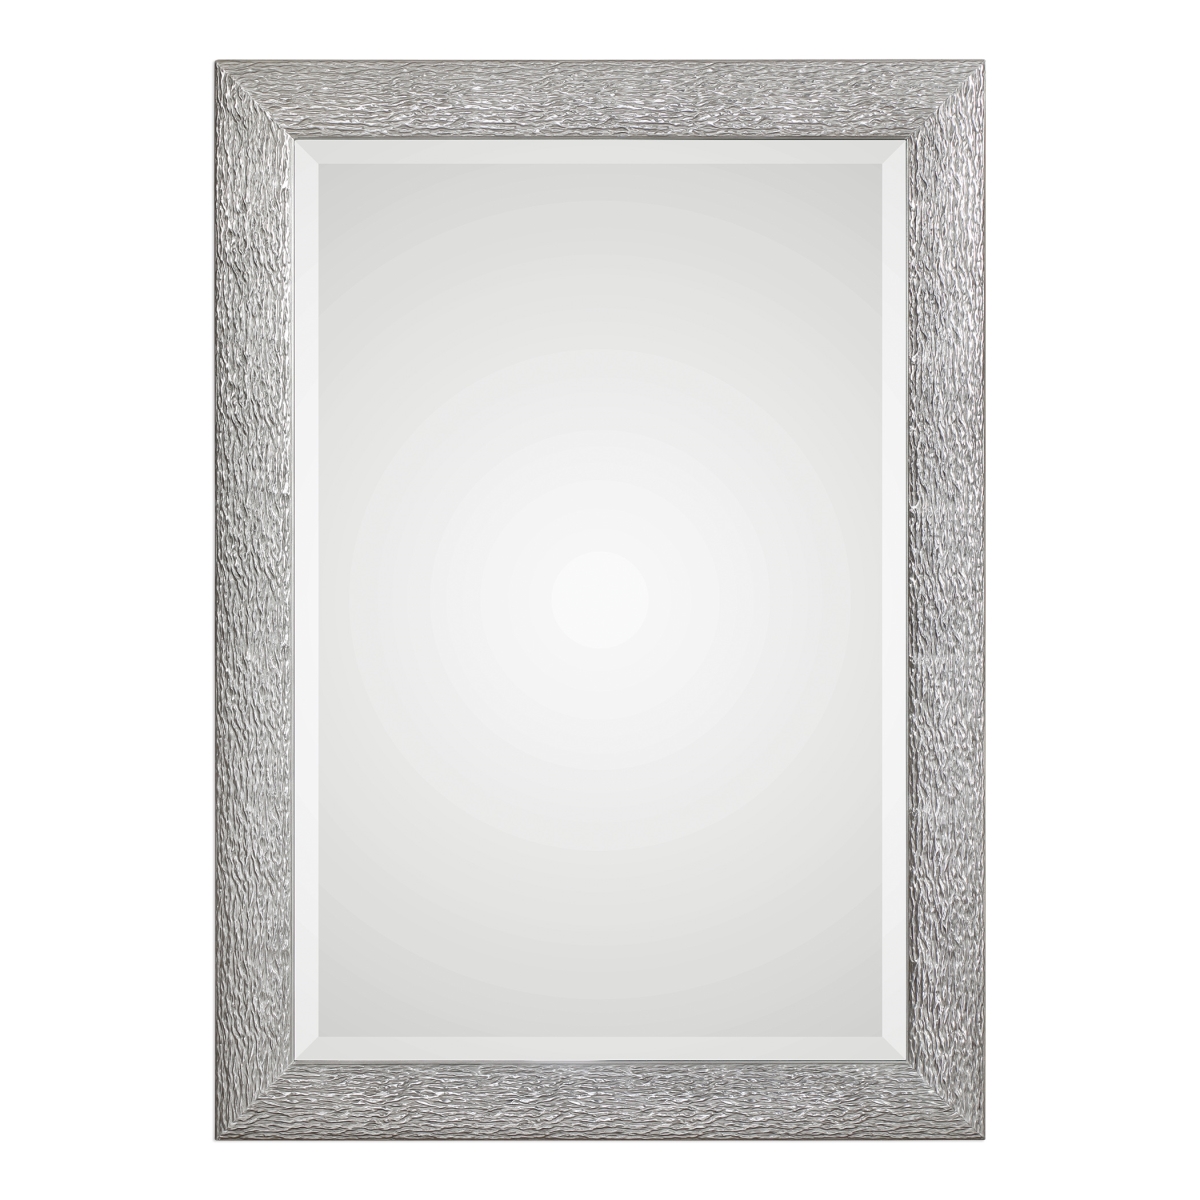 Picture of 212 Main 09361 Mossley Metallic Silver Mirror